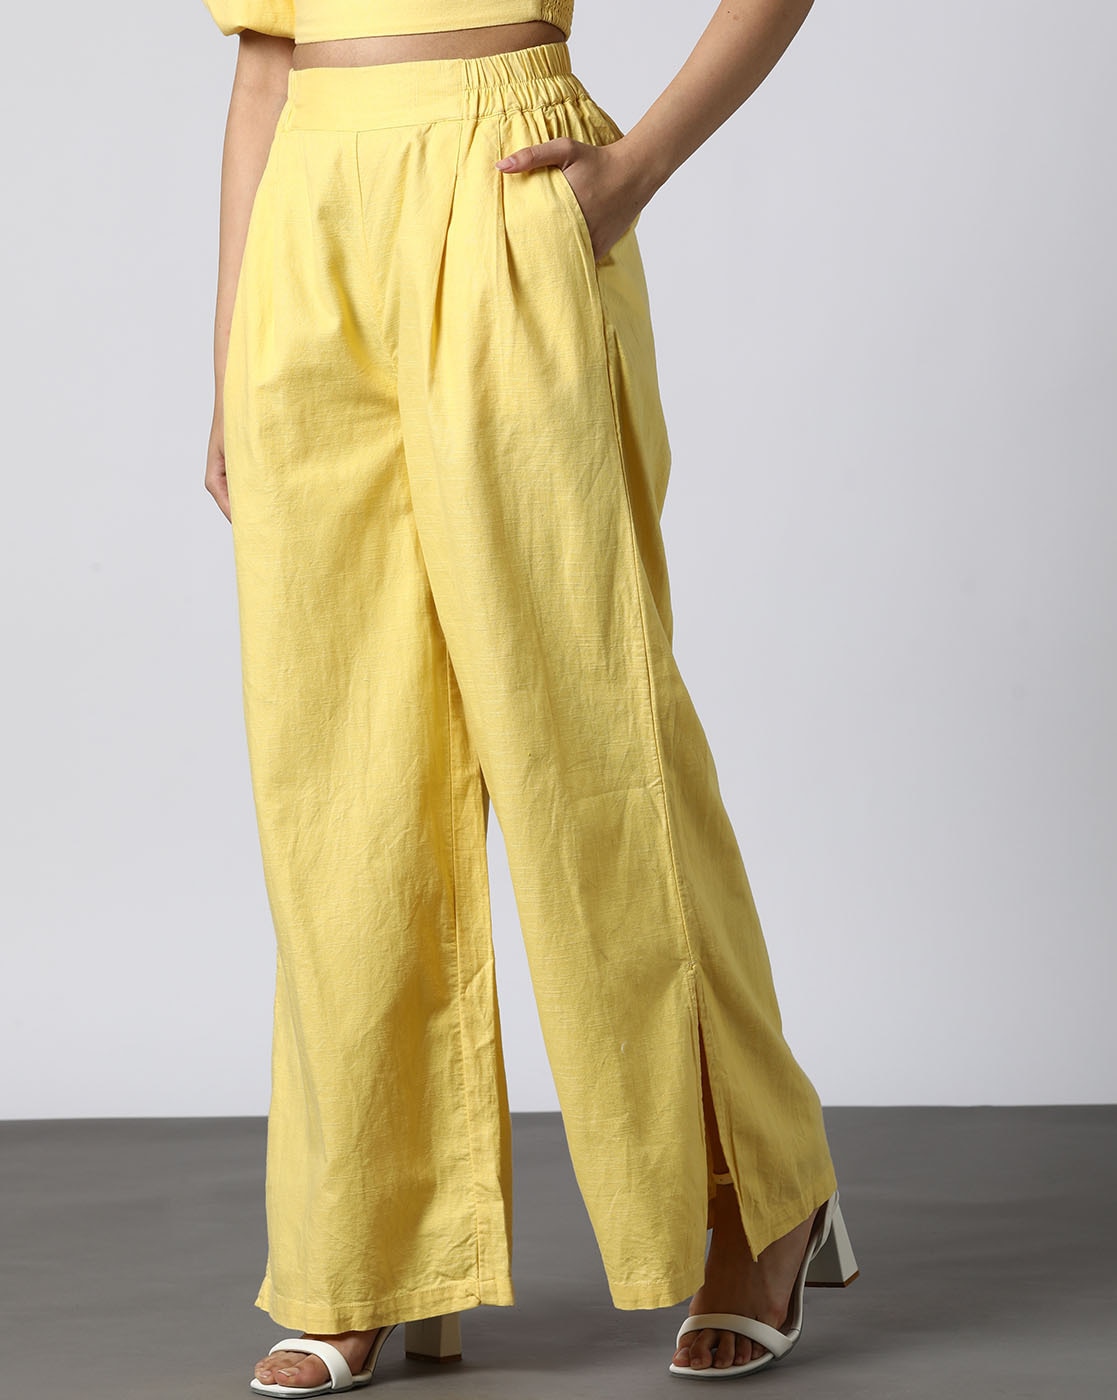 Buy All About You Women Bright Yellow Romance Ramble Wide Legs Floral Print  Cotton Trousers - Trousers for Women 21047896 | Myntra